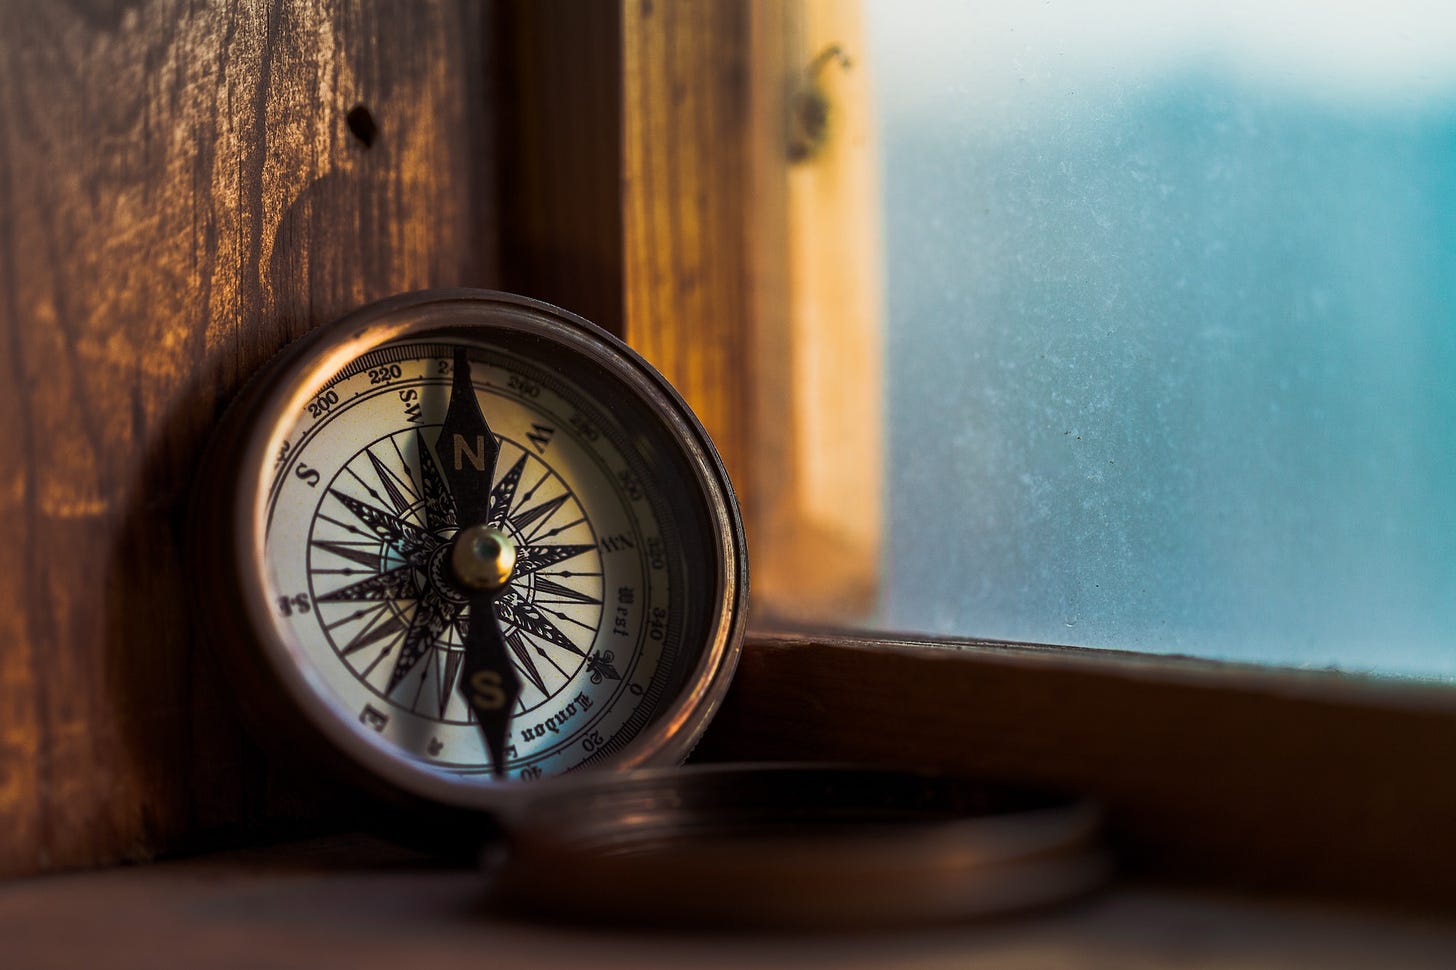 Vintage compass sitting on a window ledge with blue sea beyond.